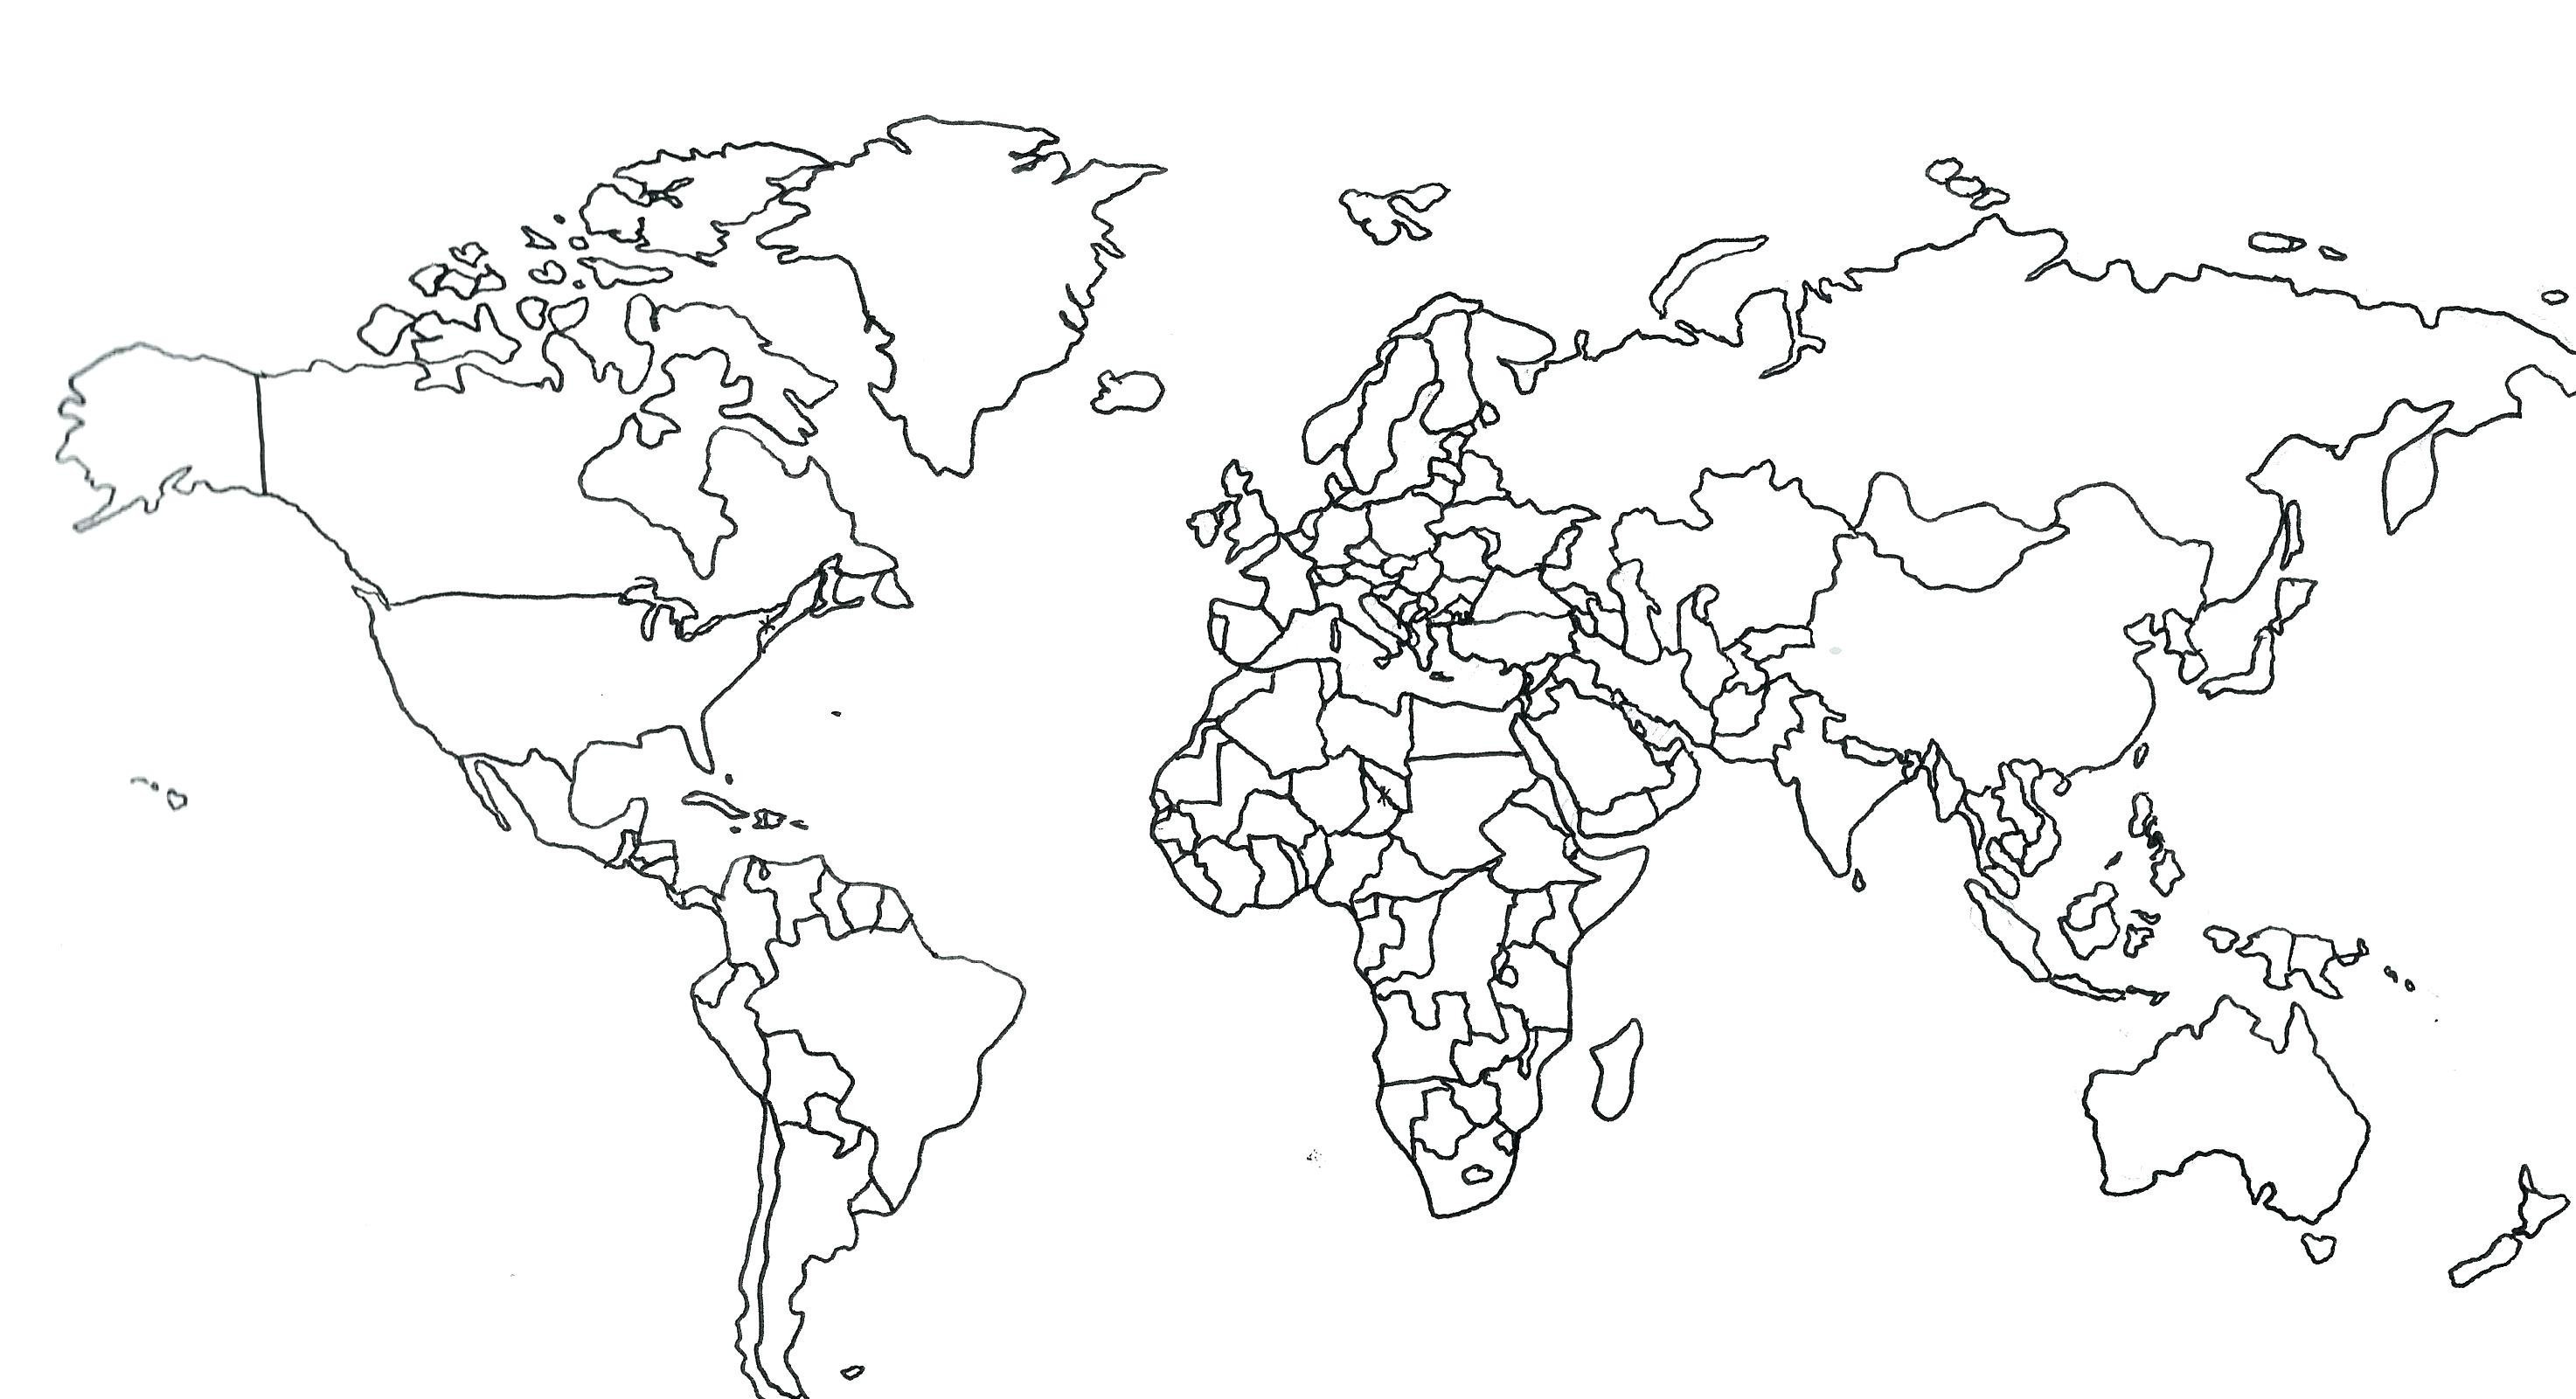 World map an best. Black clipart black and white